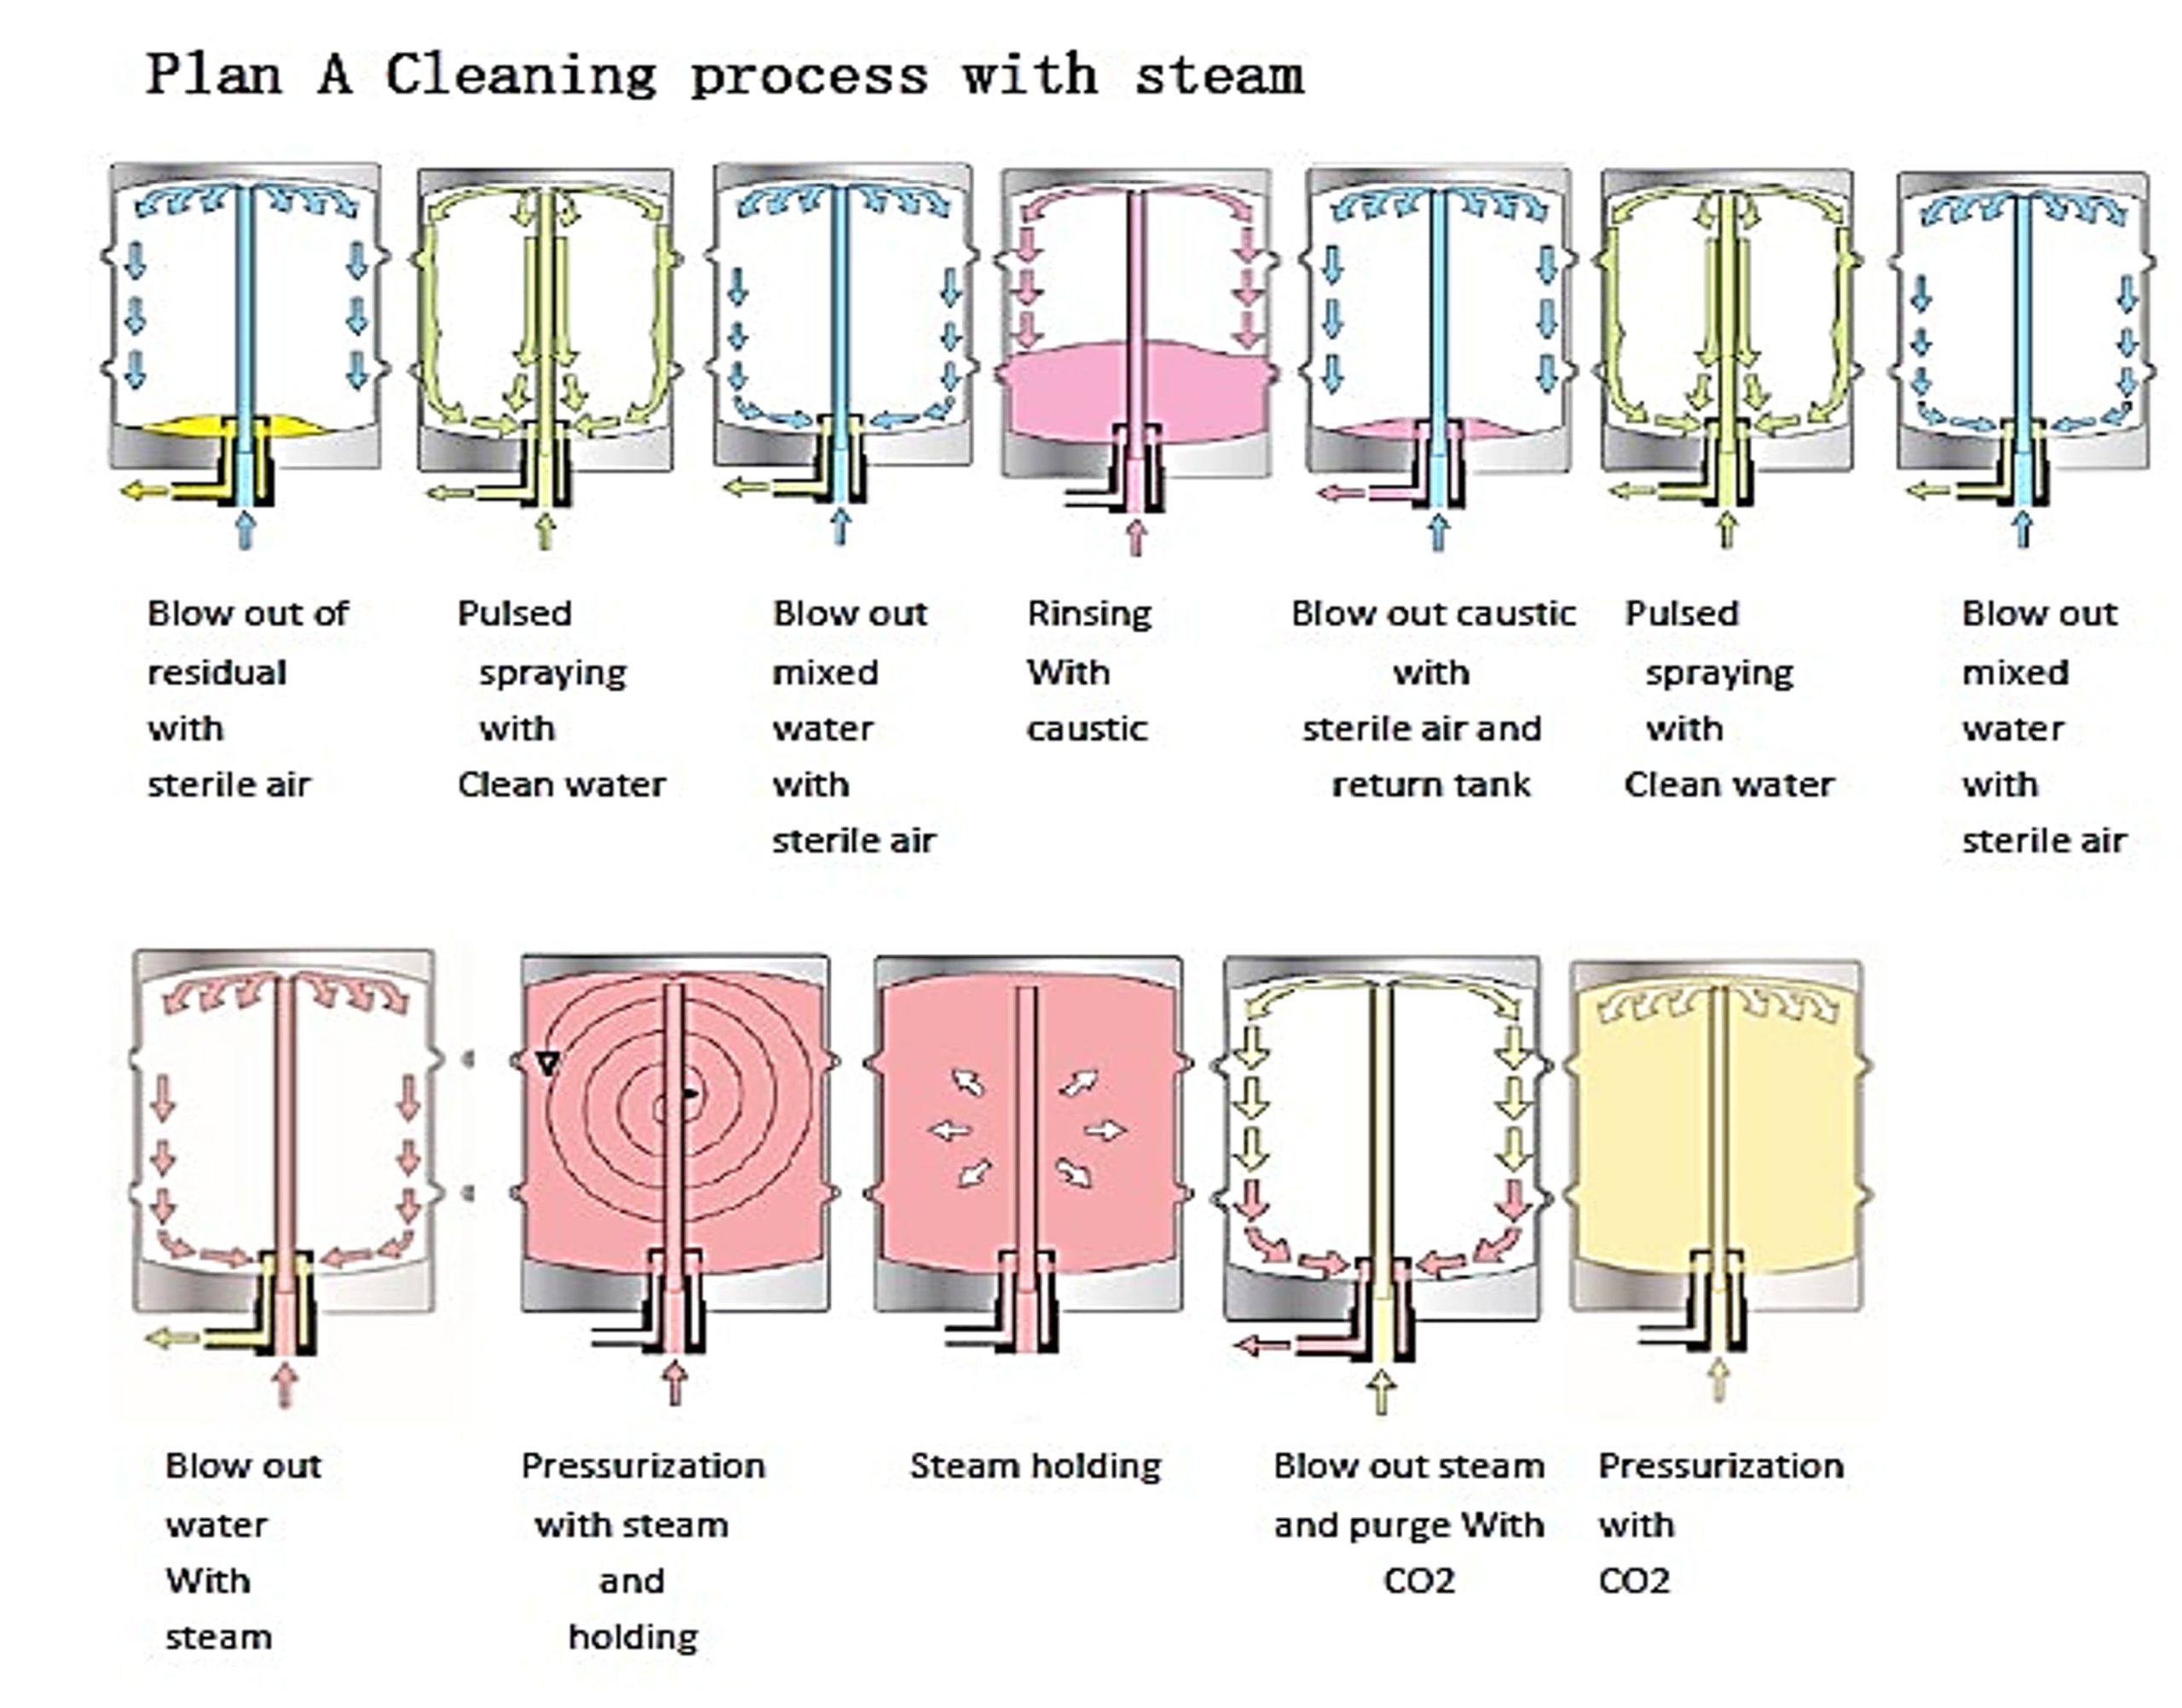 SKE-KW-Ⅱ | Plan A cleaning process with steam